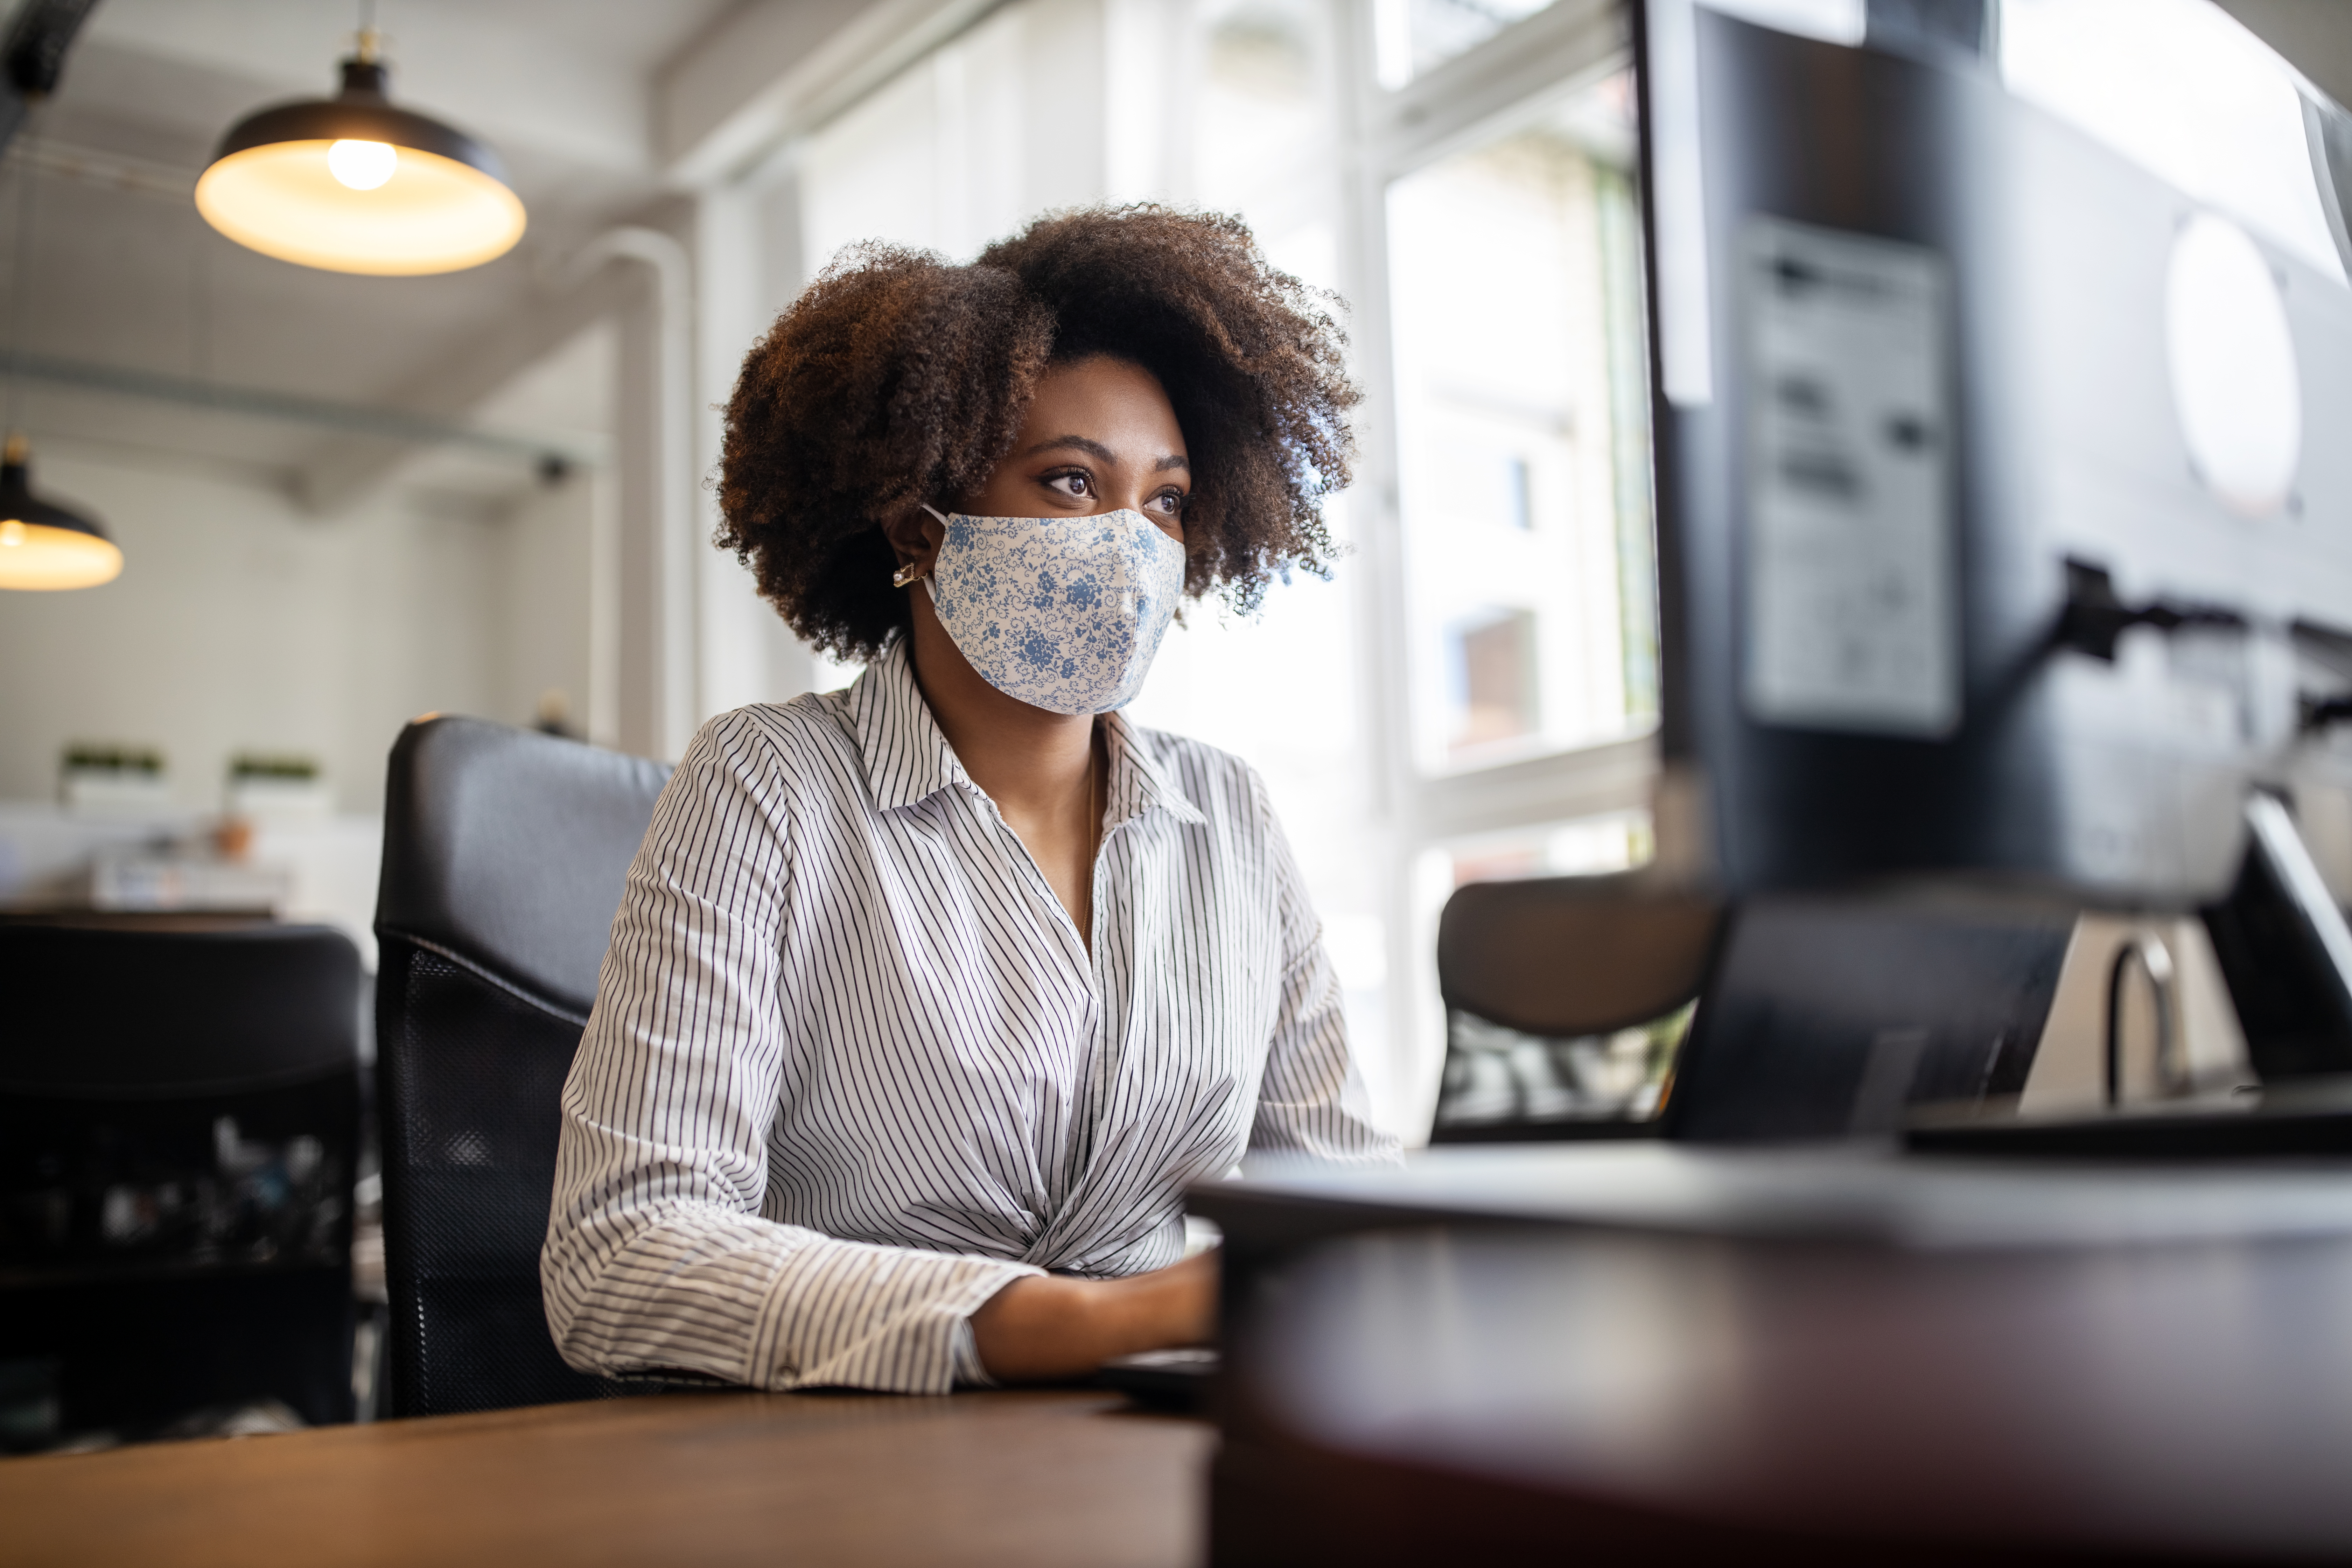 Person wearing a face mask working at a desk looking at computer monitor in an office.